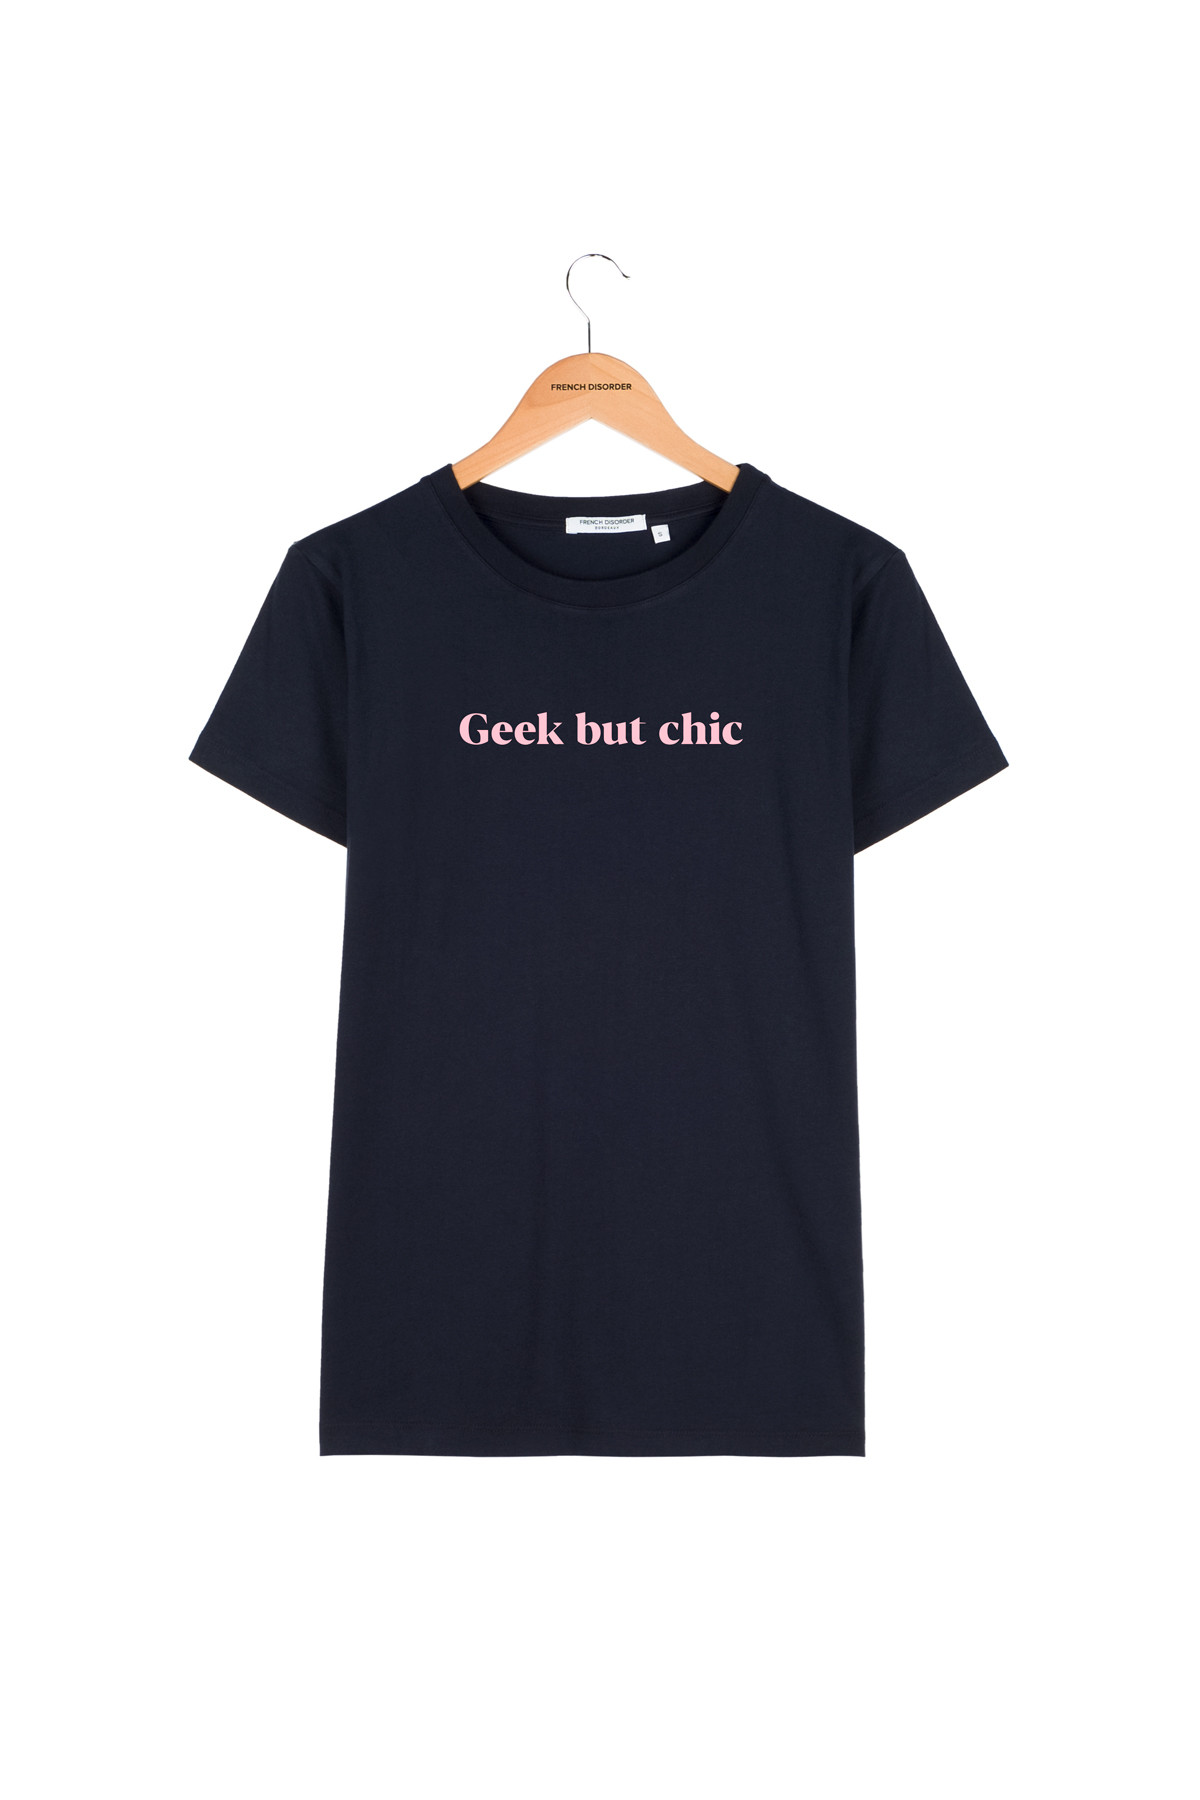 T-shirt GEEK BUT CHIC French Disorder